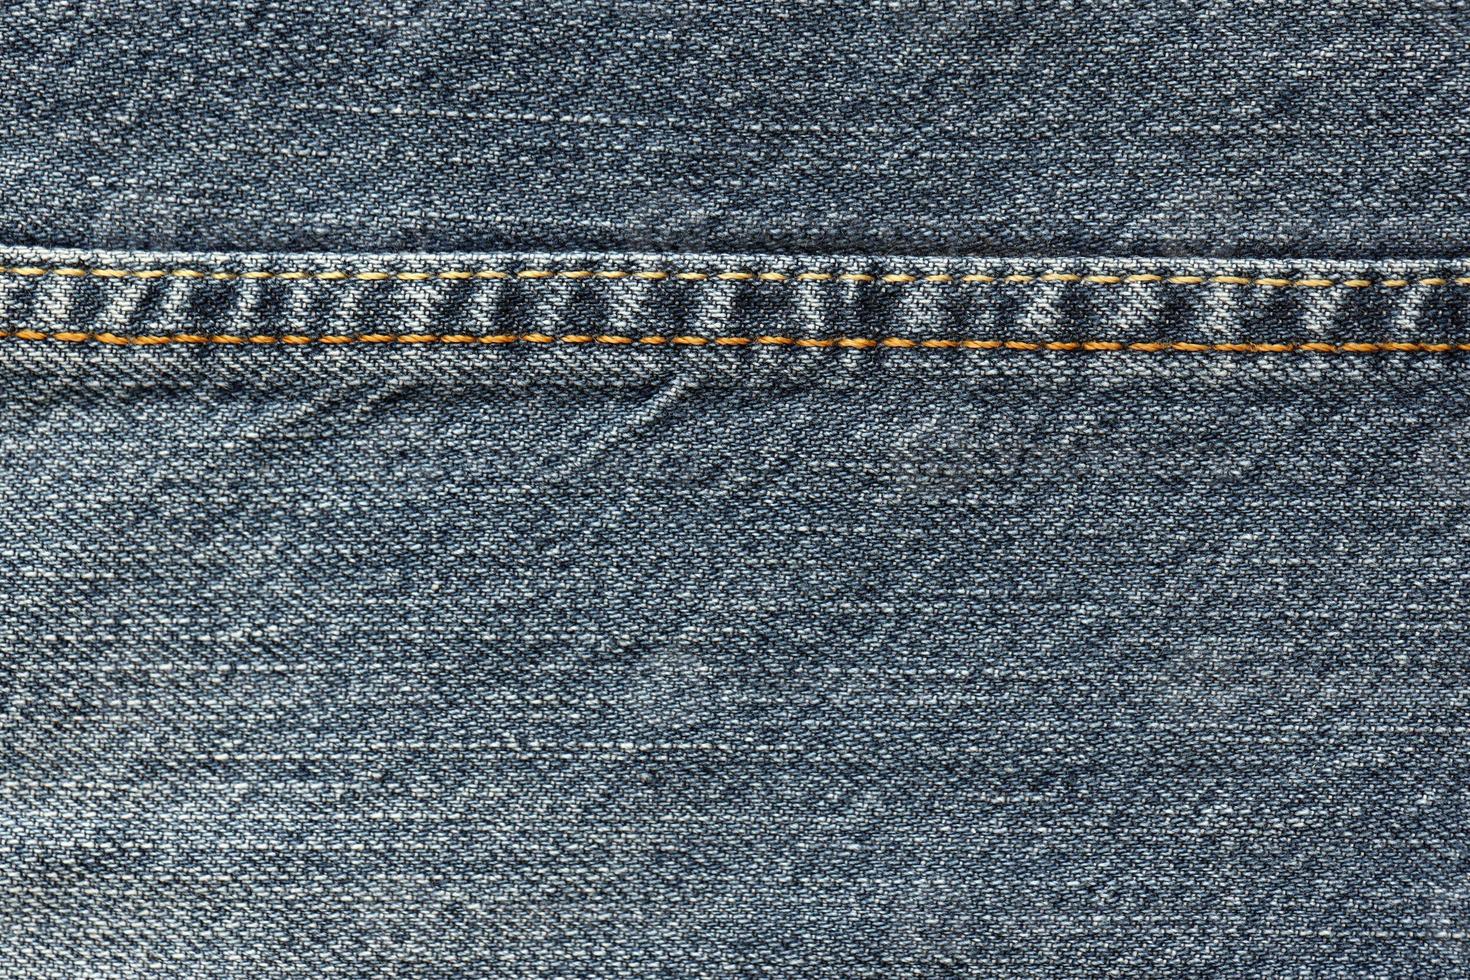 Detailed abstract texture of dark blue denim cloth. Background image of old used denim trousers fabric photo